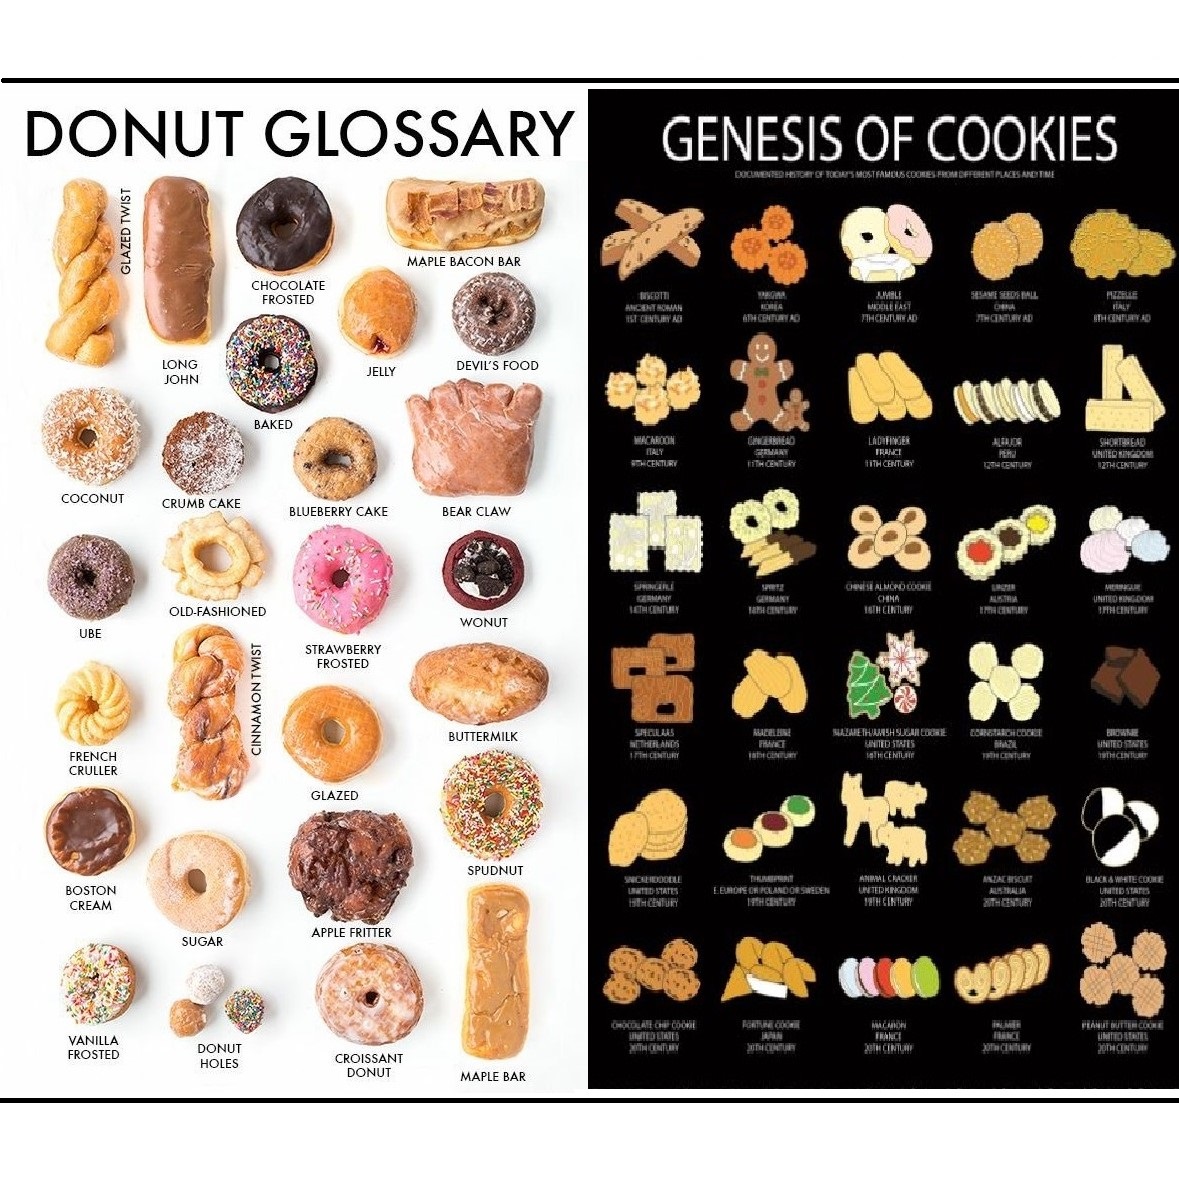 A donut glossary and a historical chart for cookies